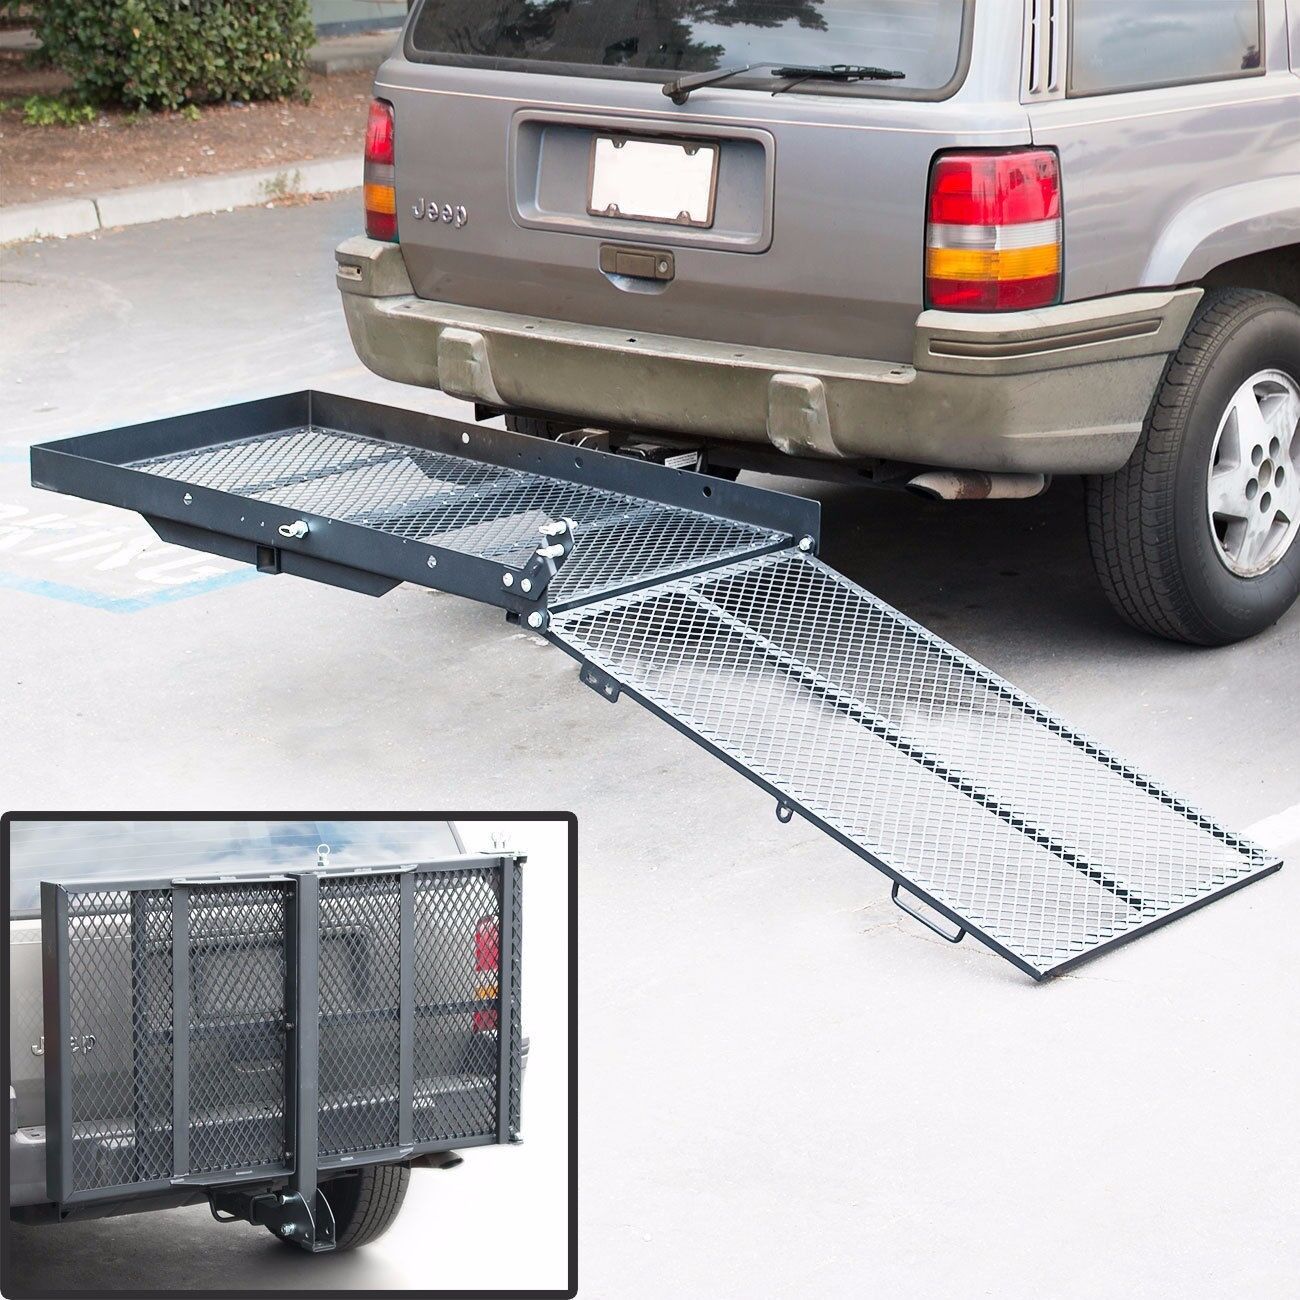 New Mobility Carrier Wheelchair Scooter Rack Disability Medical Ramp Hitch Mount